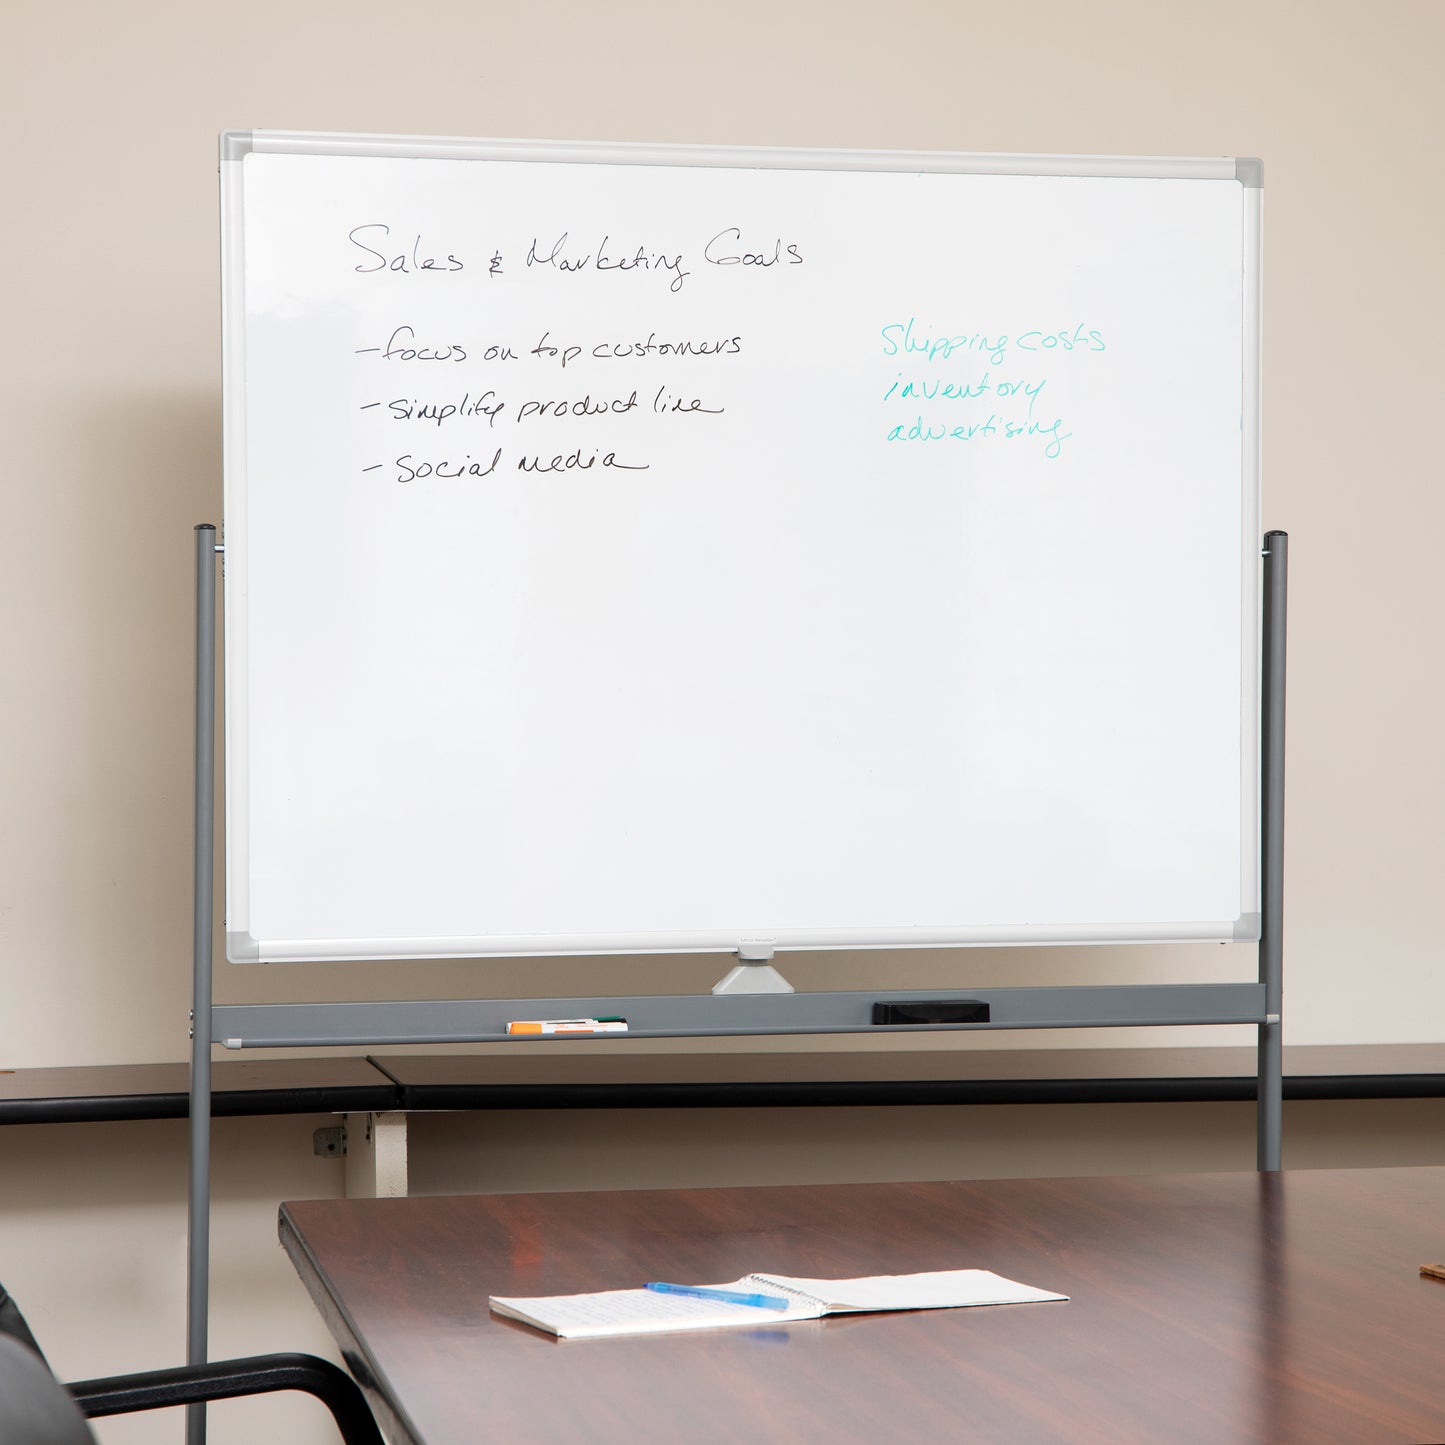 Mind Reader Rolling Double-Sided Dry Erase Magnetic Board, Board Size: 47 x 35.5, Overall Size 49.5"L x 21"W x 73.5"H, White